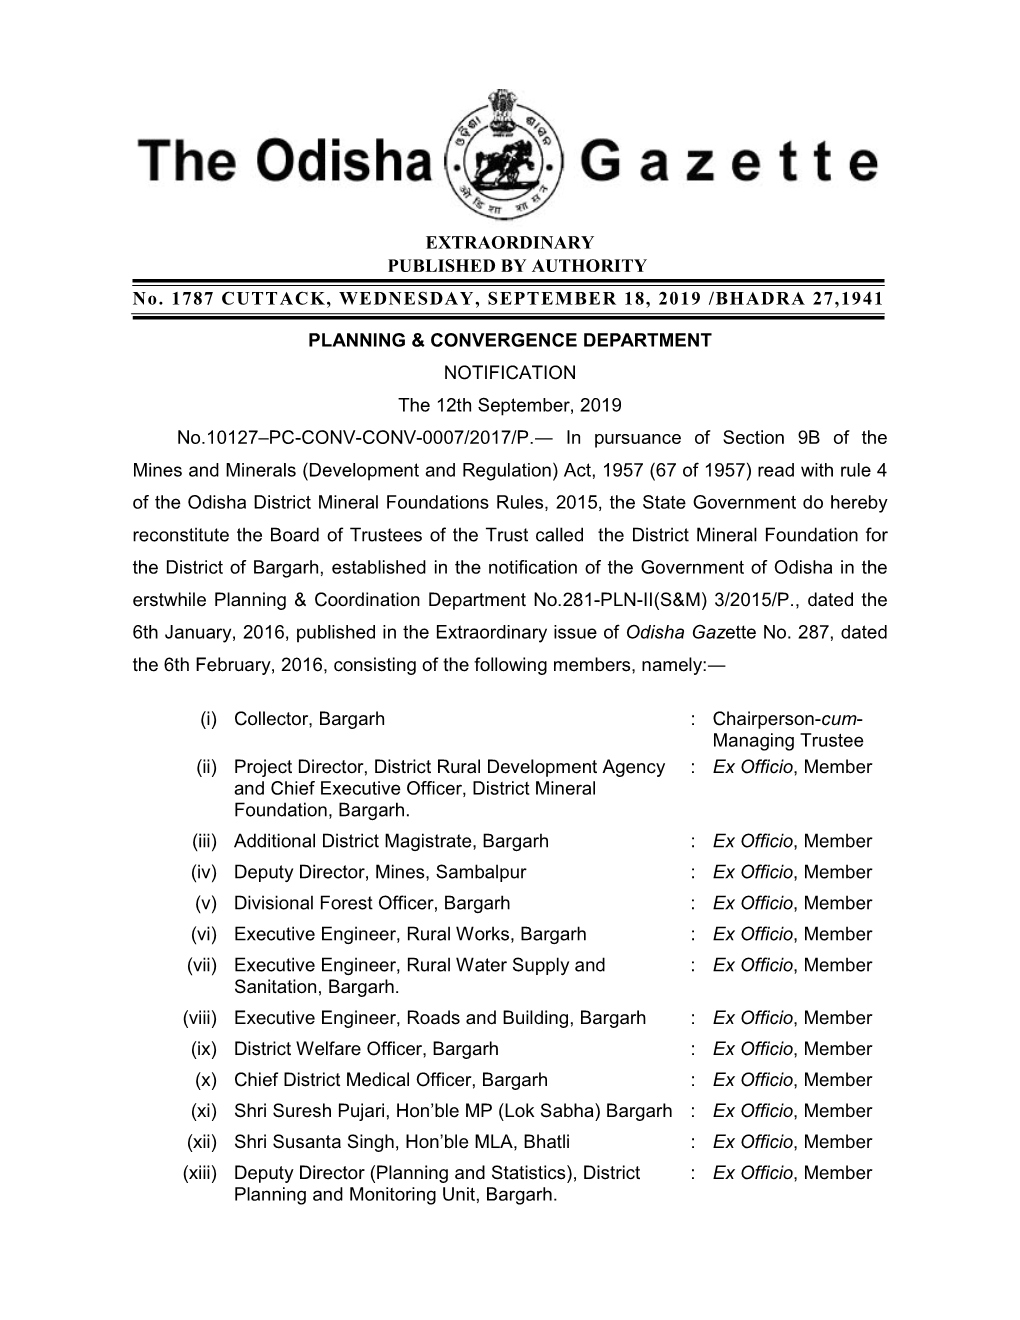 EXTRAORDINARY PUBLISHED by AUTHORITY No. 1787 CUTTACK, WEDNESDAY, SEPTEMBER 18, 2019 /BHADRA 27,1941 PLANNING & CONVERGENCE